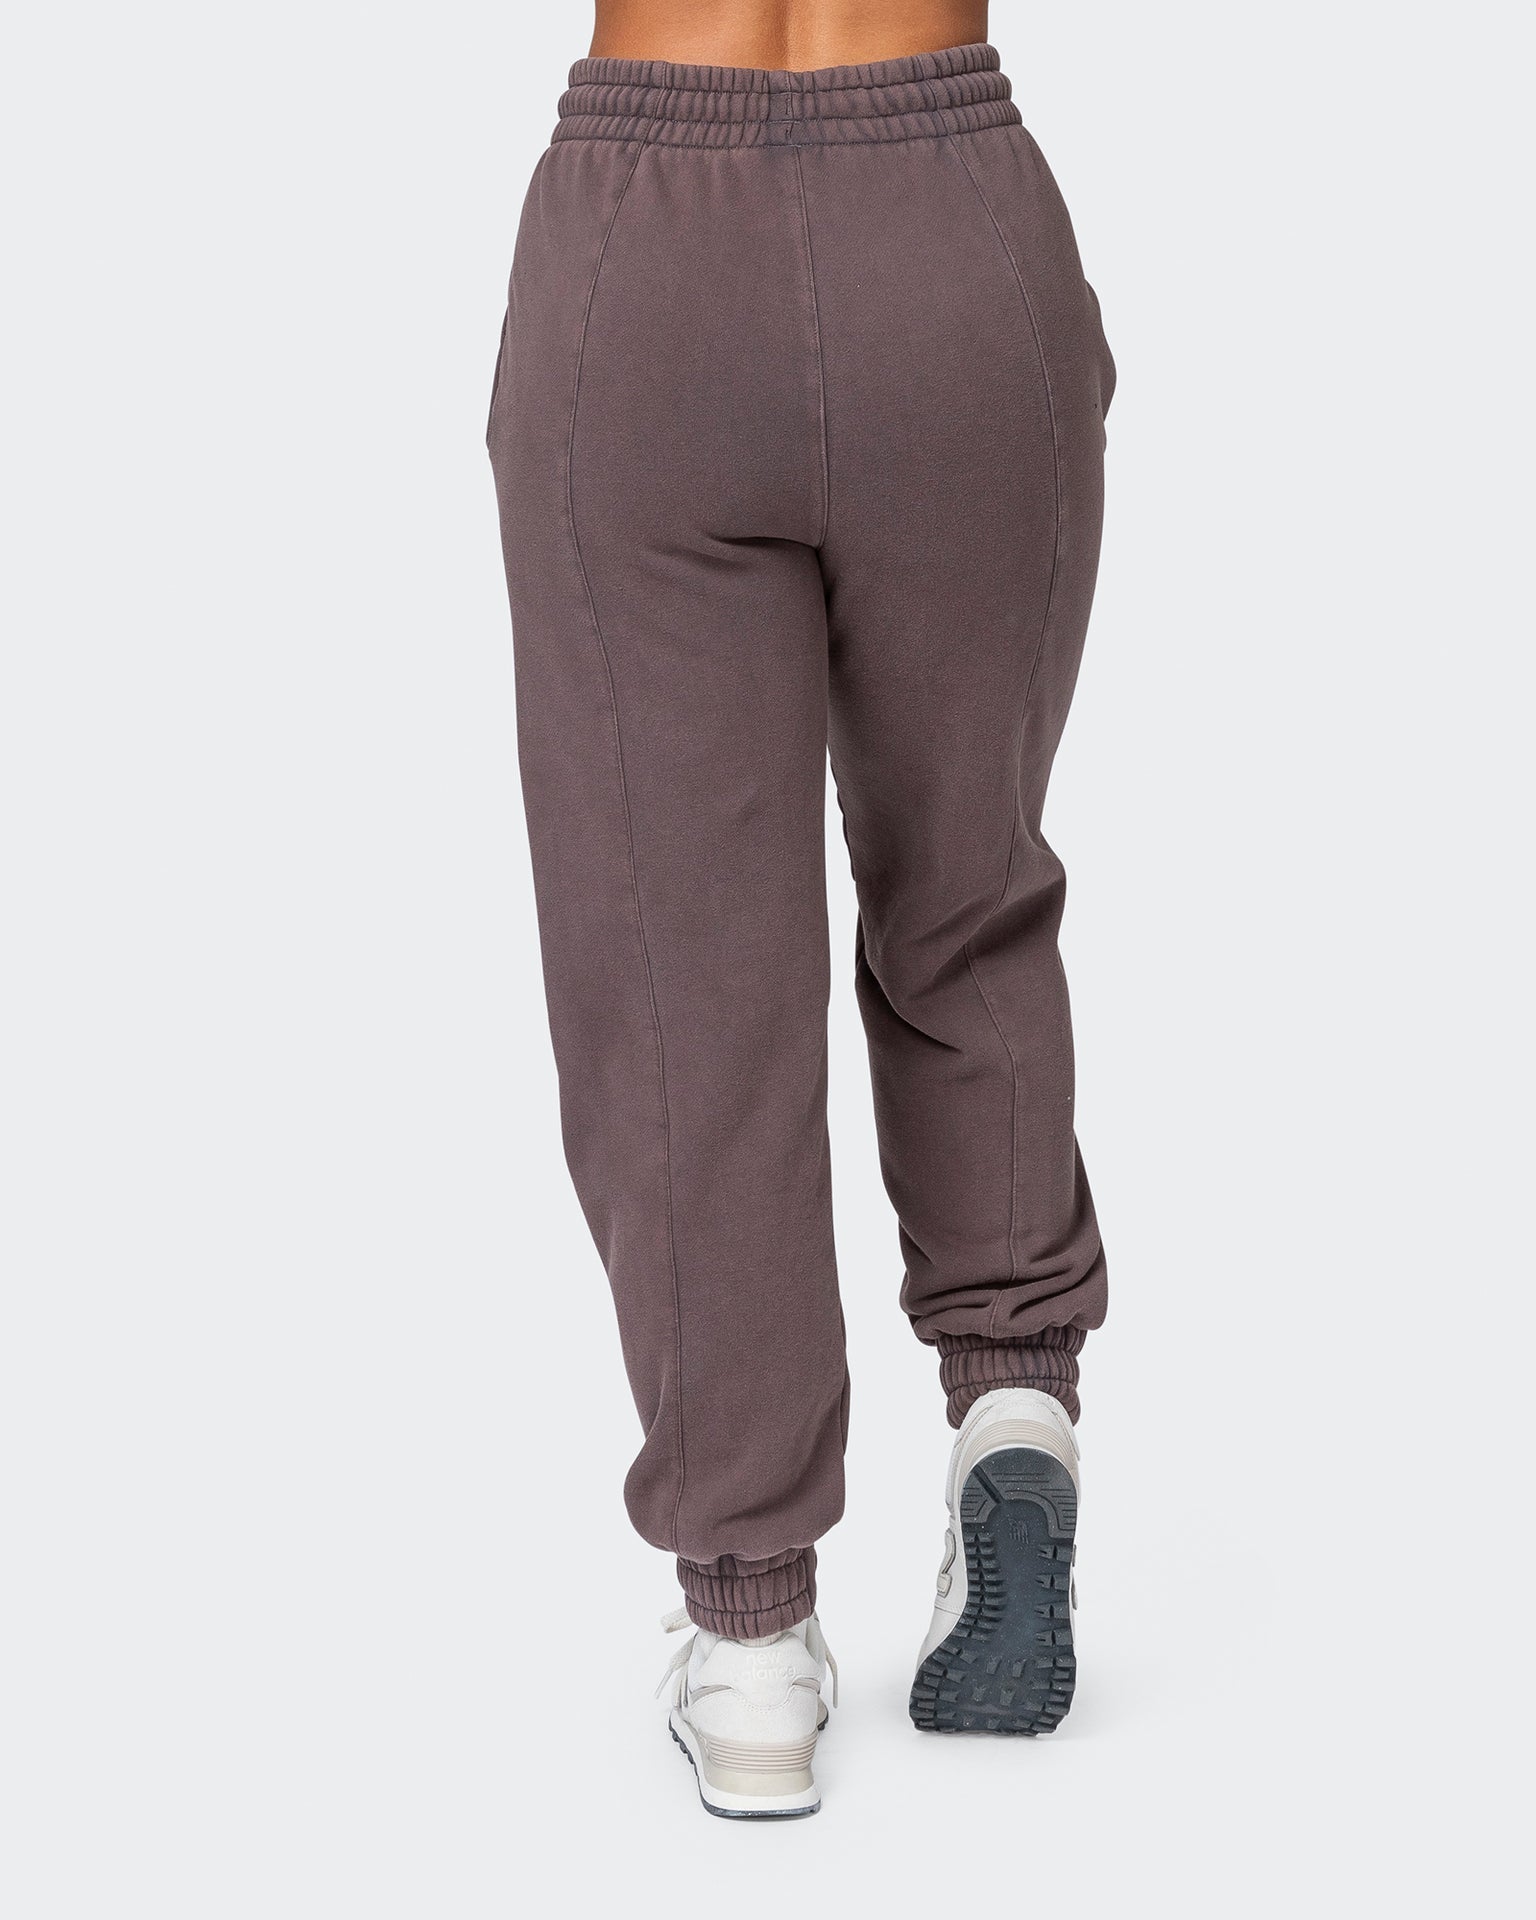 Muscle Nation Track Pants Vintage Lounge Trackpants - Washed Peppercorn